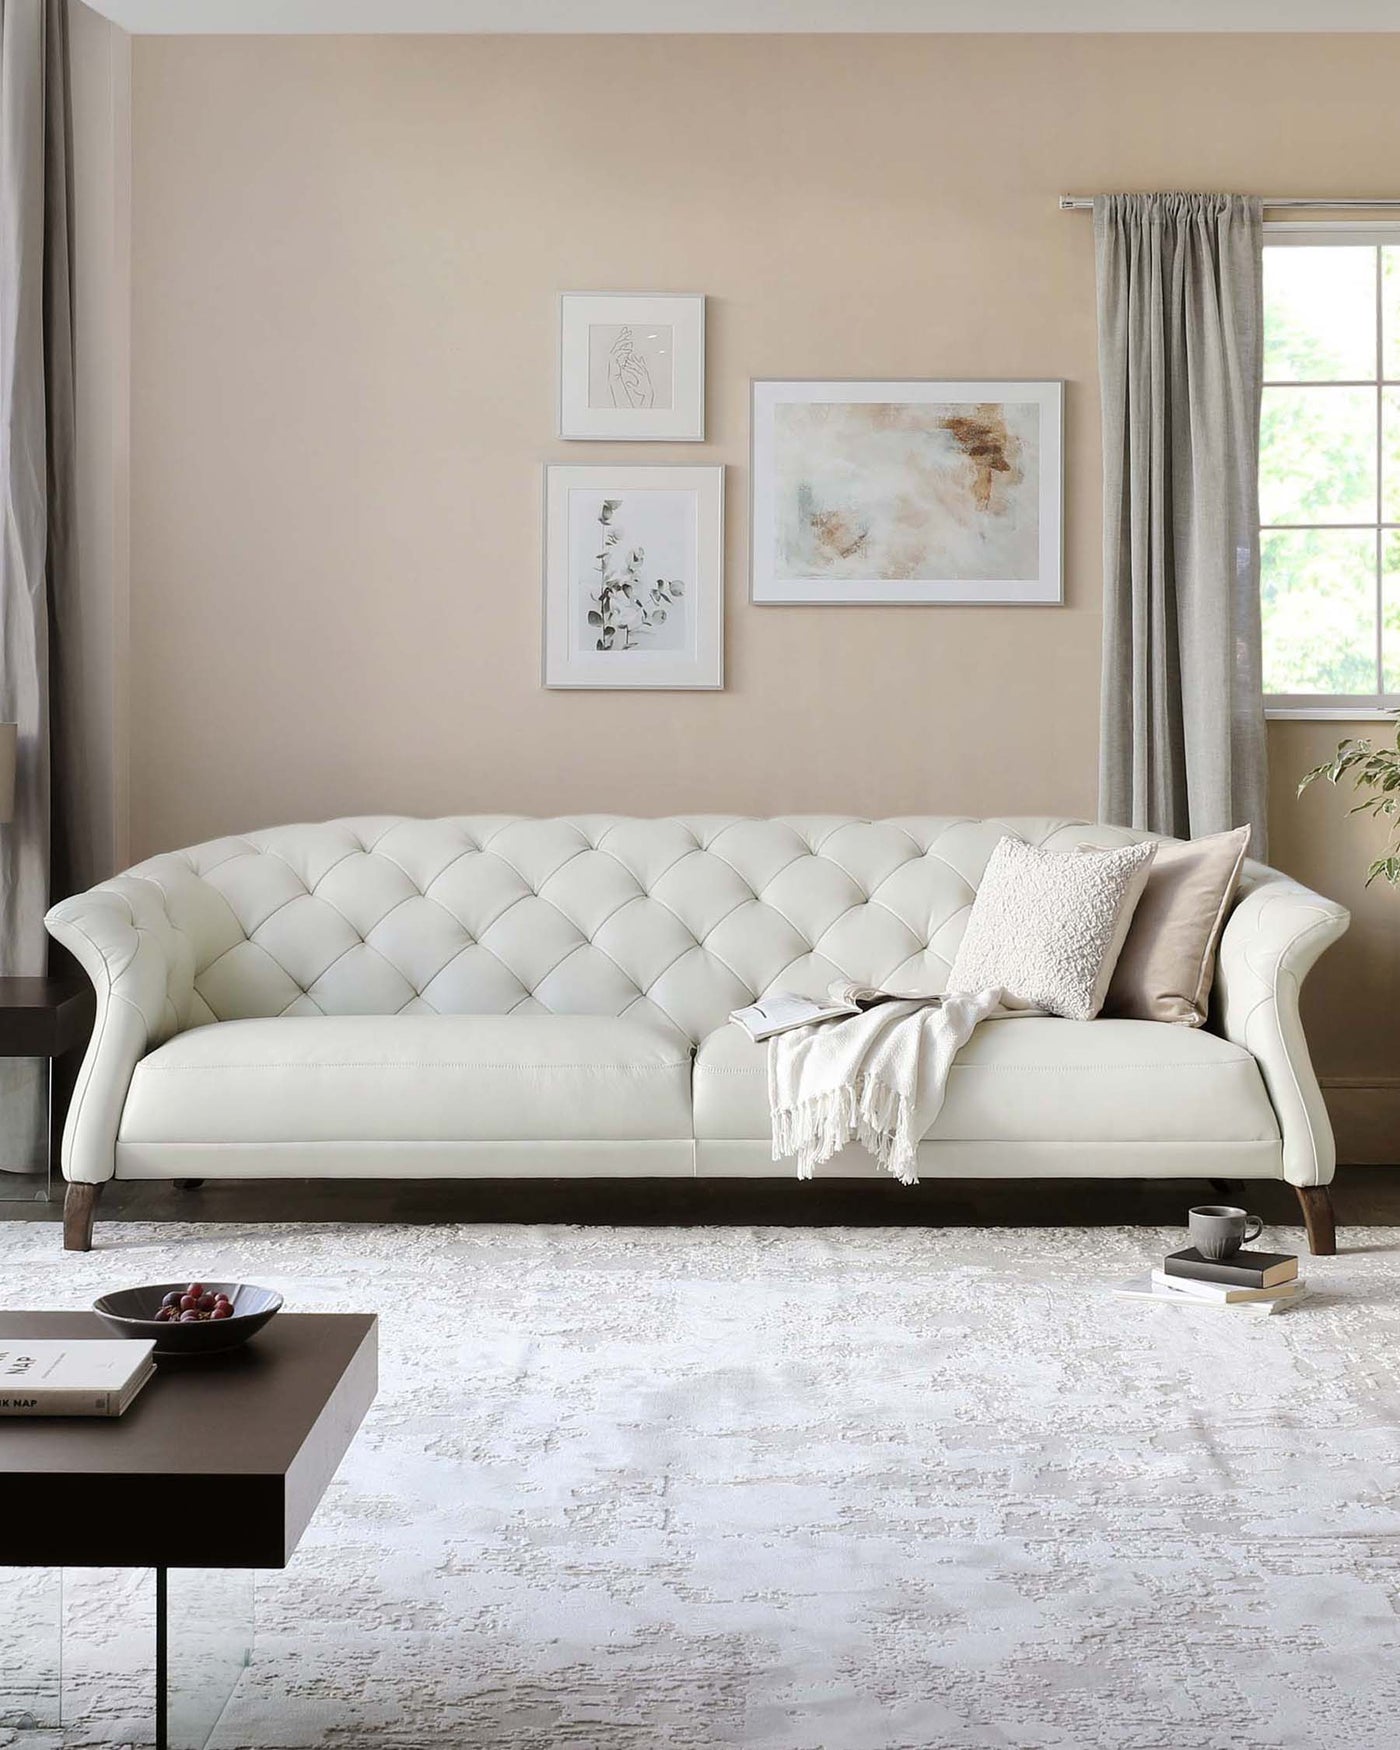 Elegant ivory tufted chesterfield sofa with rolled arms and wooden legs, complemented by a textured beige throw and decorative cushion. In the foreground, a modern square side table with a dark finish displaying a bowl of fruit and a hardcover book.